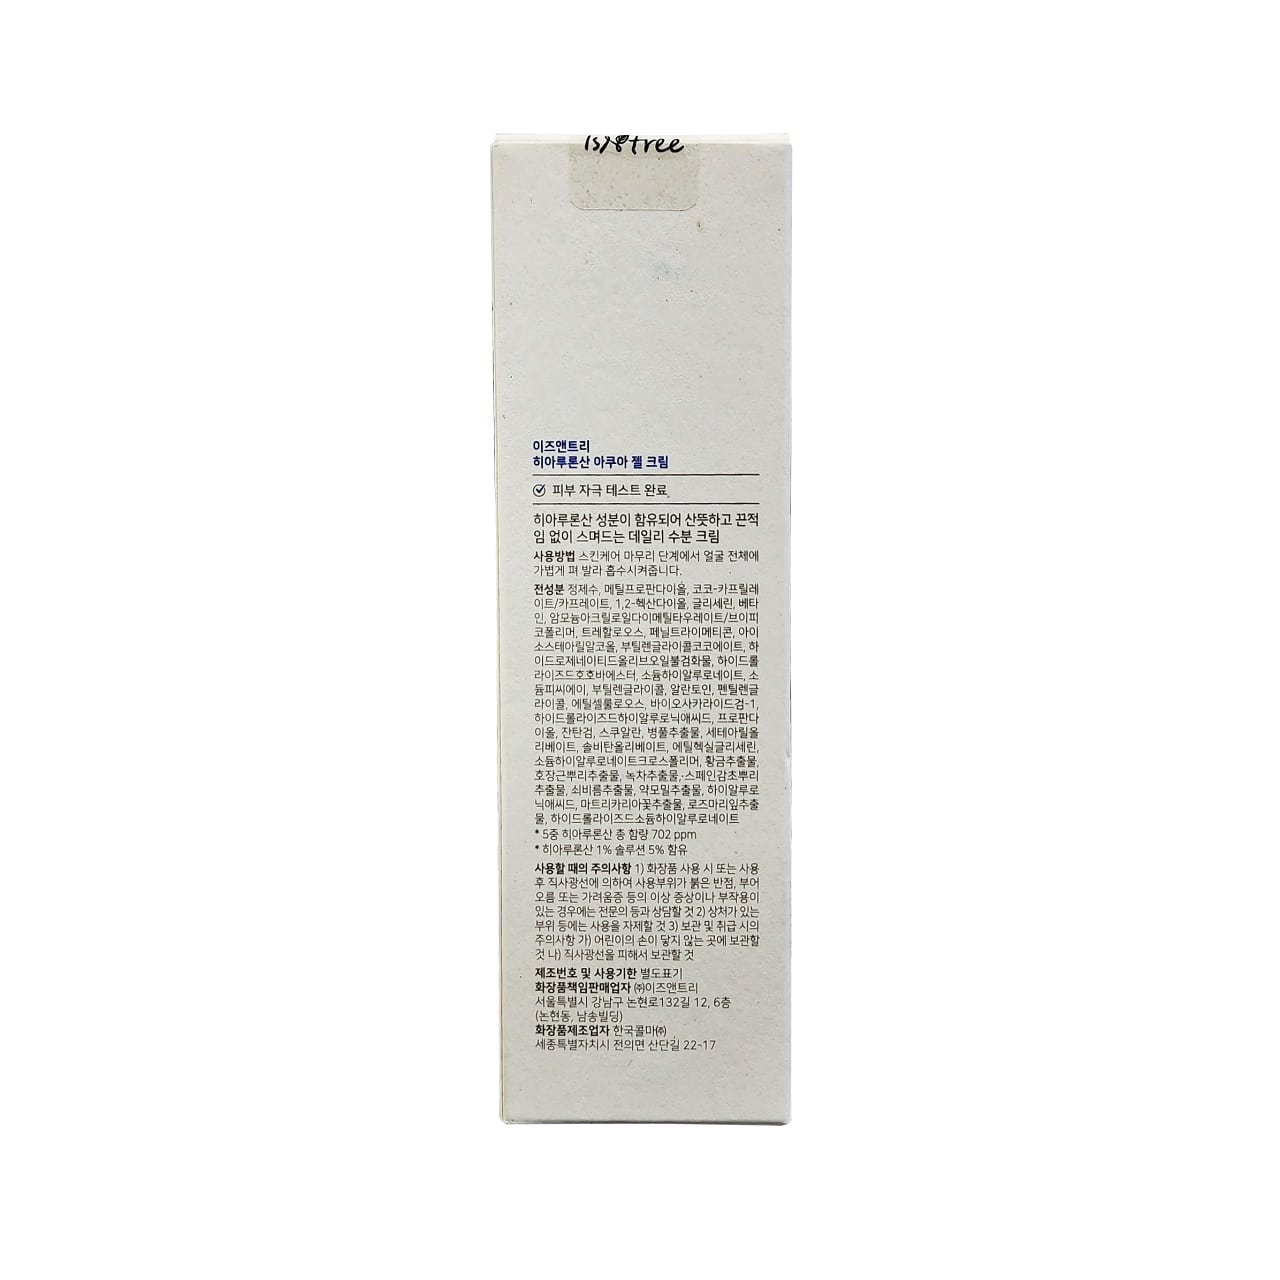 Description, how to use, ingredients, cautions for Isntree Hyaluronic Acid Aqua Gel Cream (100 mL) in Korean